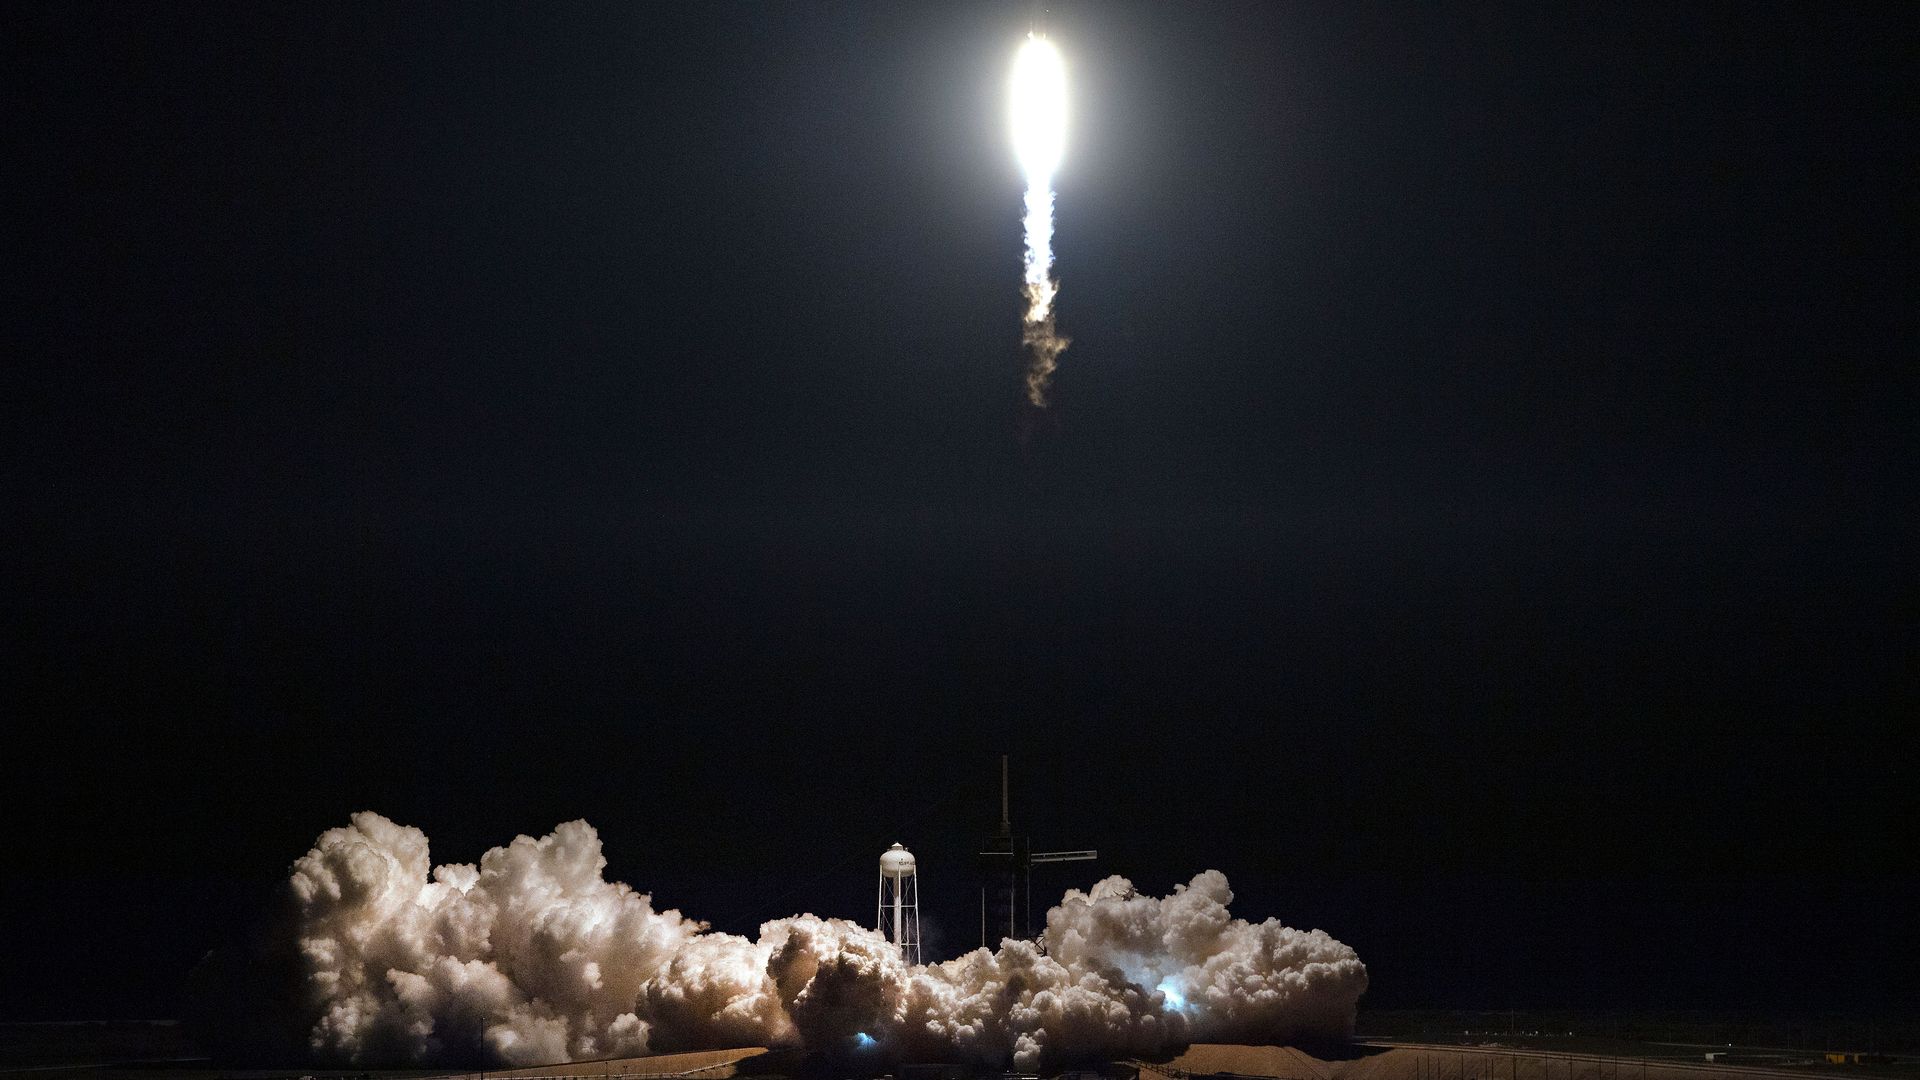 SpaceX Falcon 9 rocket with the company's Crew Dragon spacecraft onboard takes off during the Demo-1 mission, at the Kennedy Space Center in Florida 